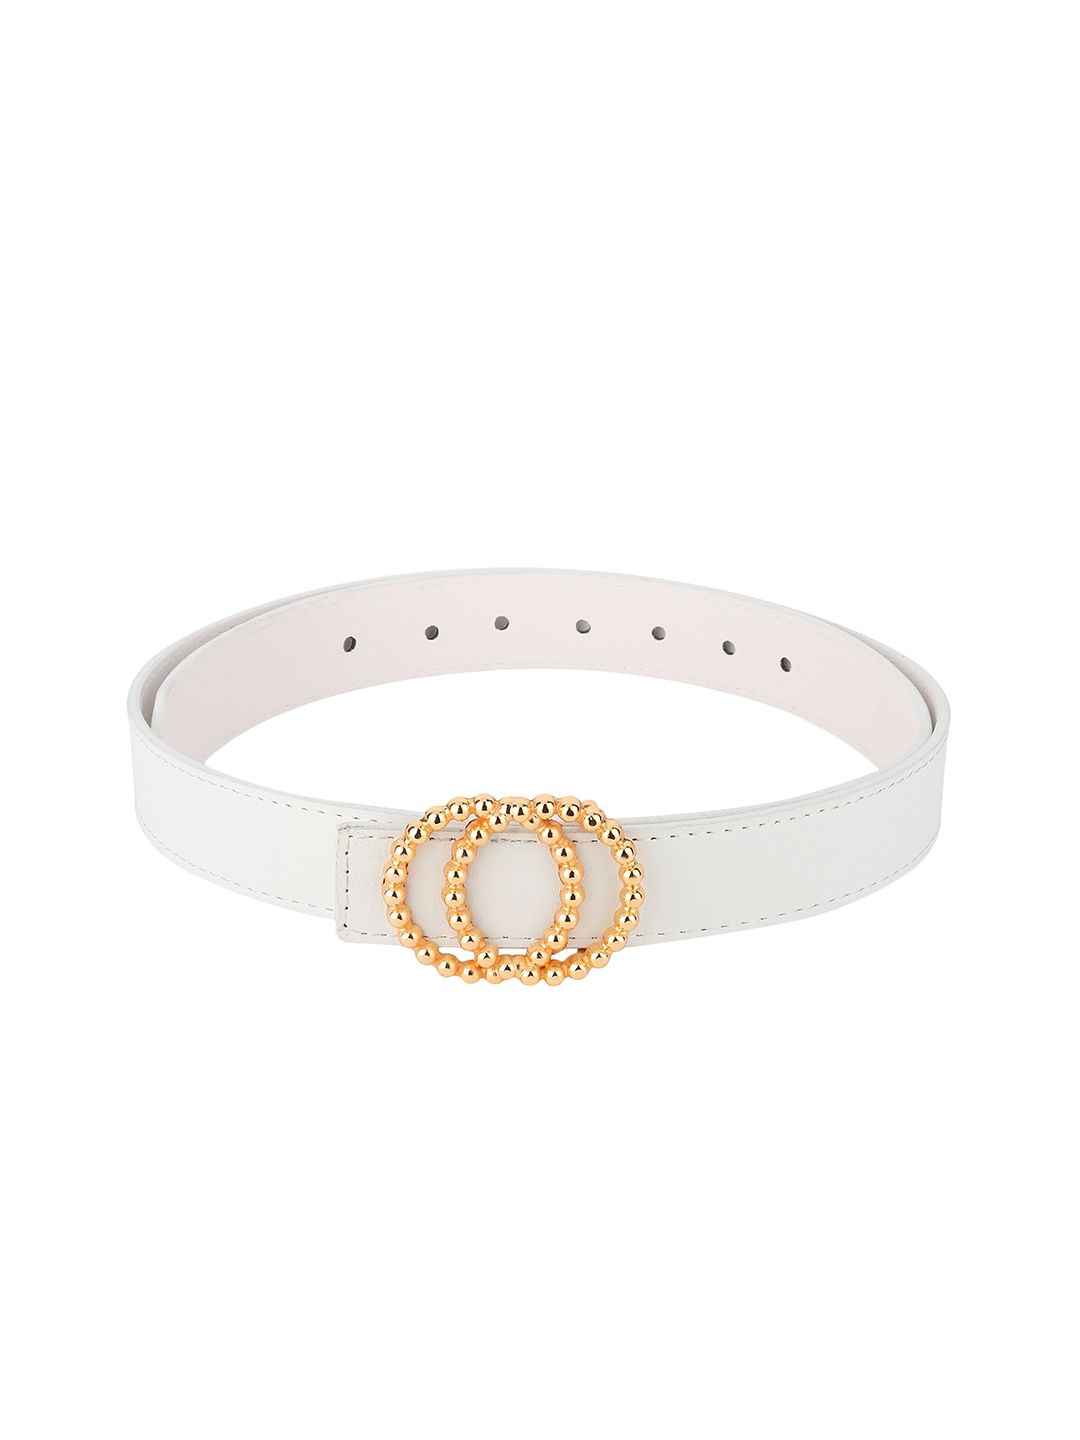 Kastner Women White & Gold Casual and Stylish Belt Price in India